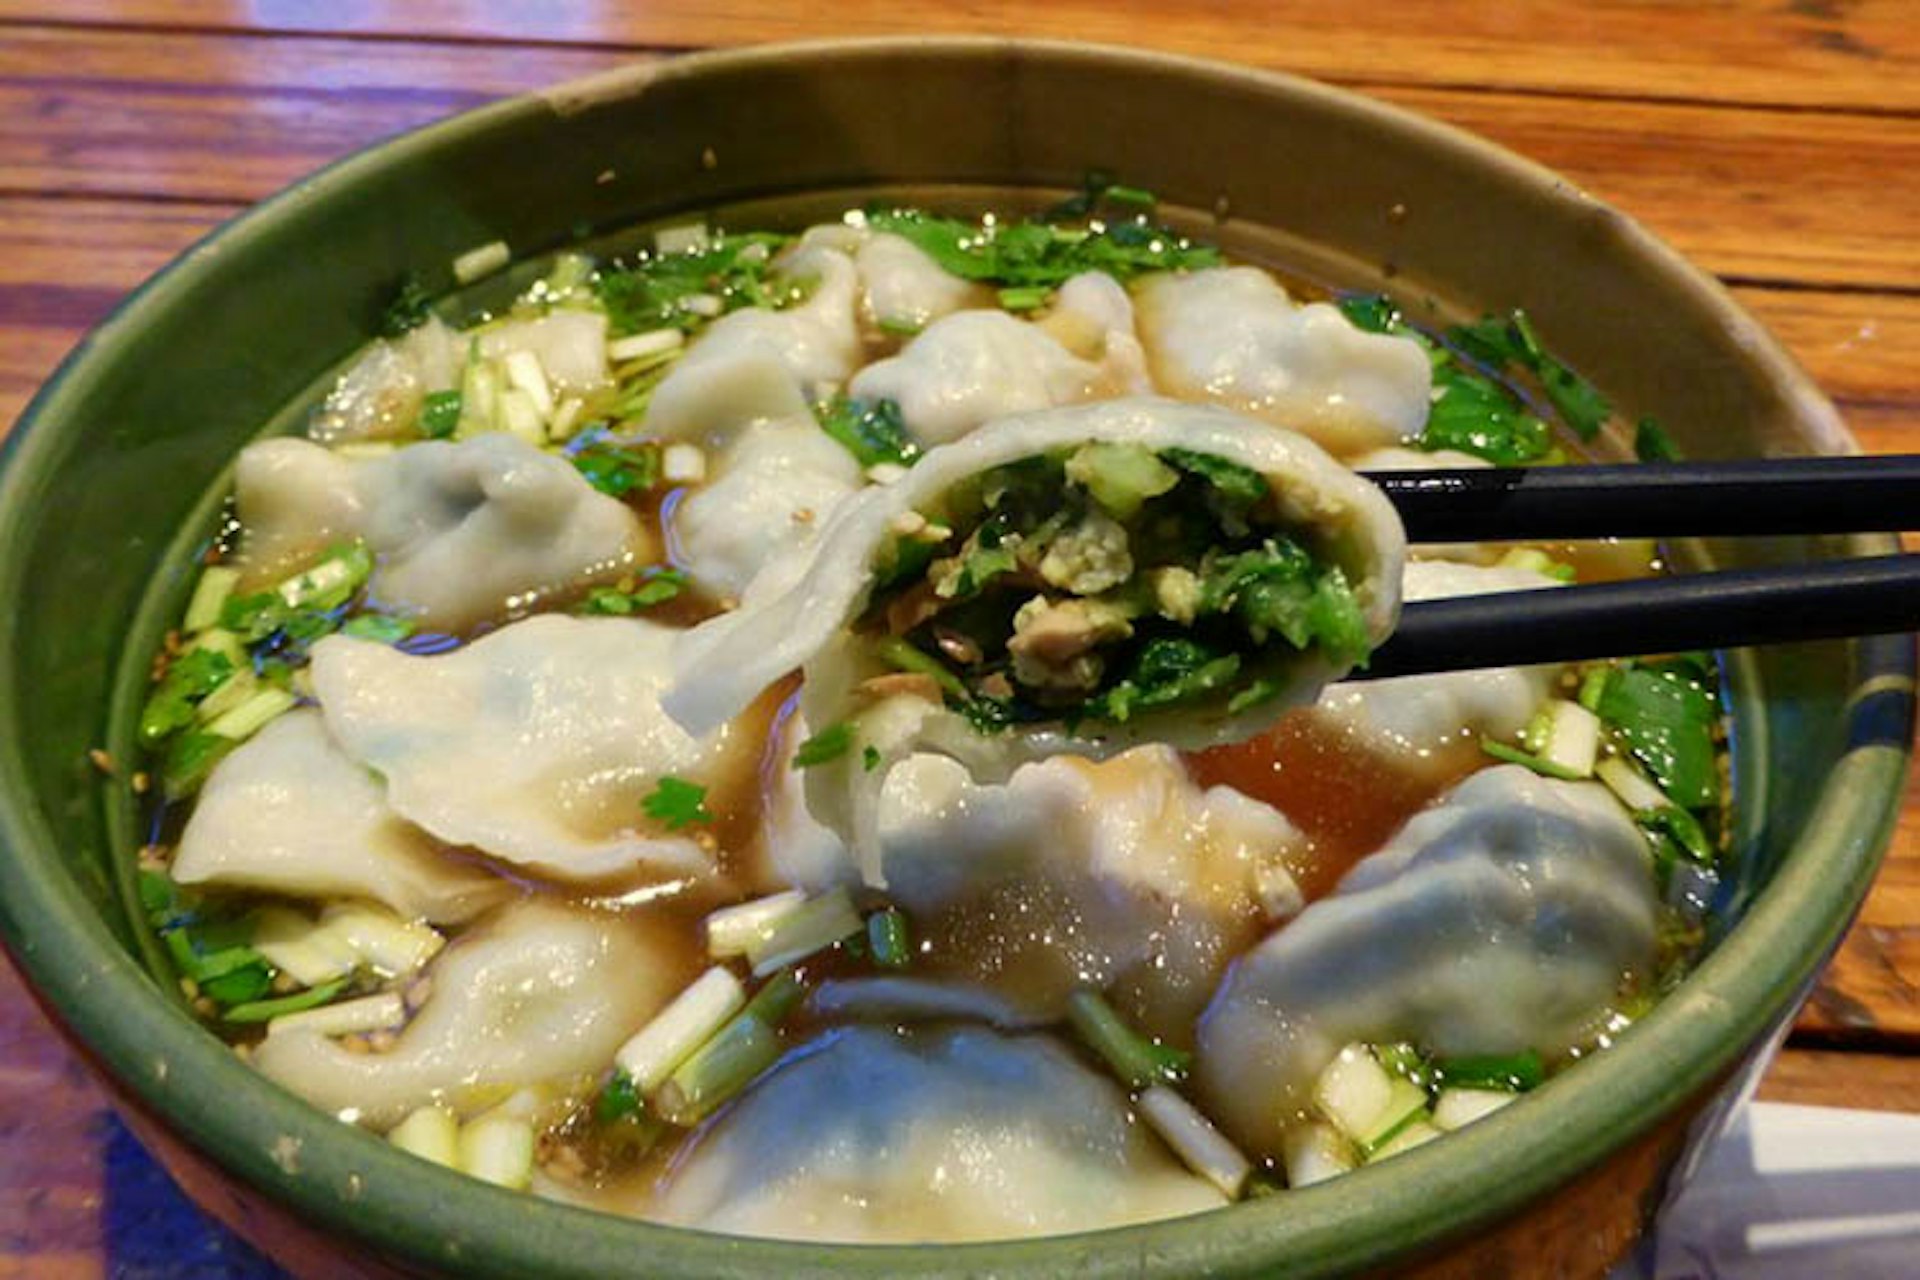 Savoury Beijing-style soup dumplings. Image by Phillip Tang / Lonely Planet